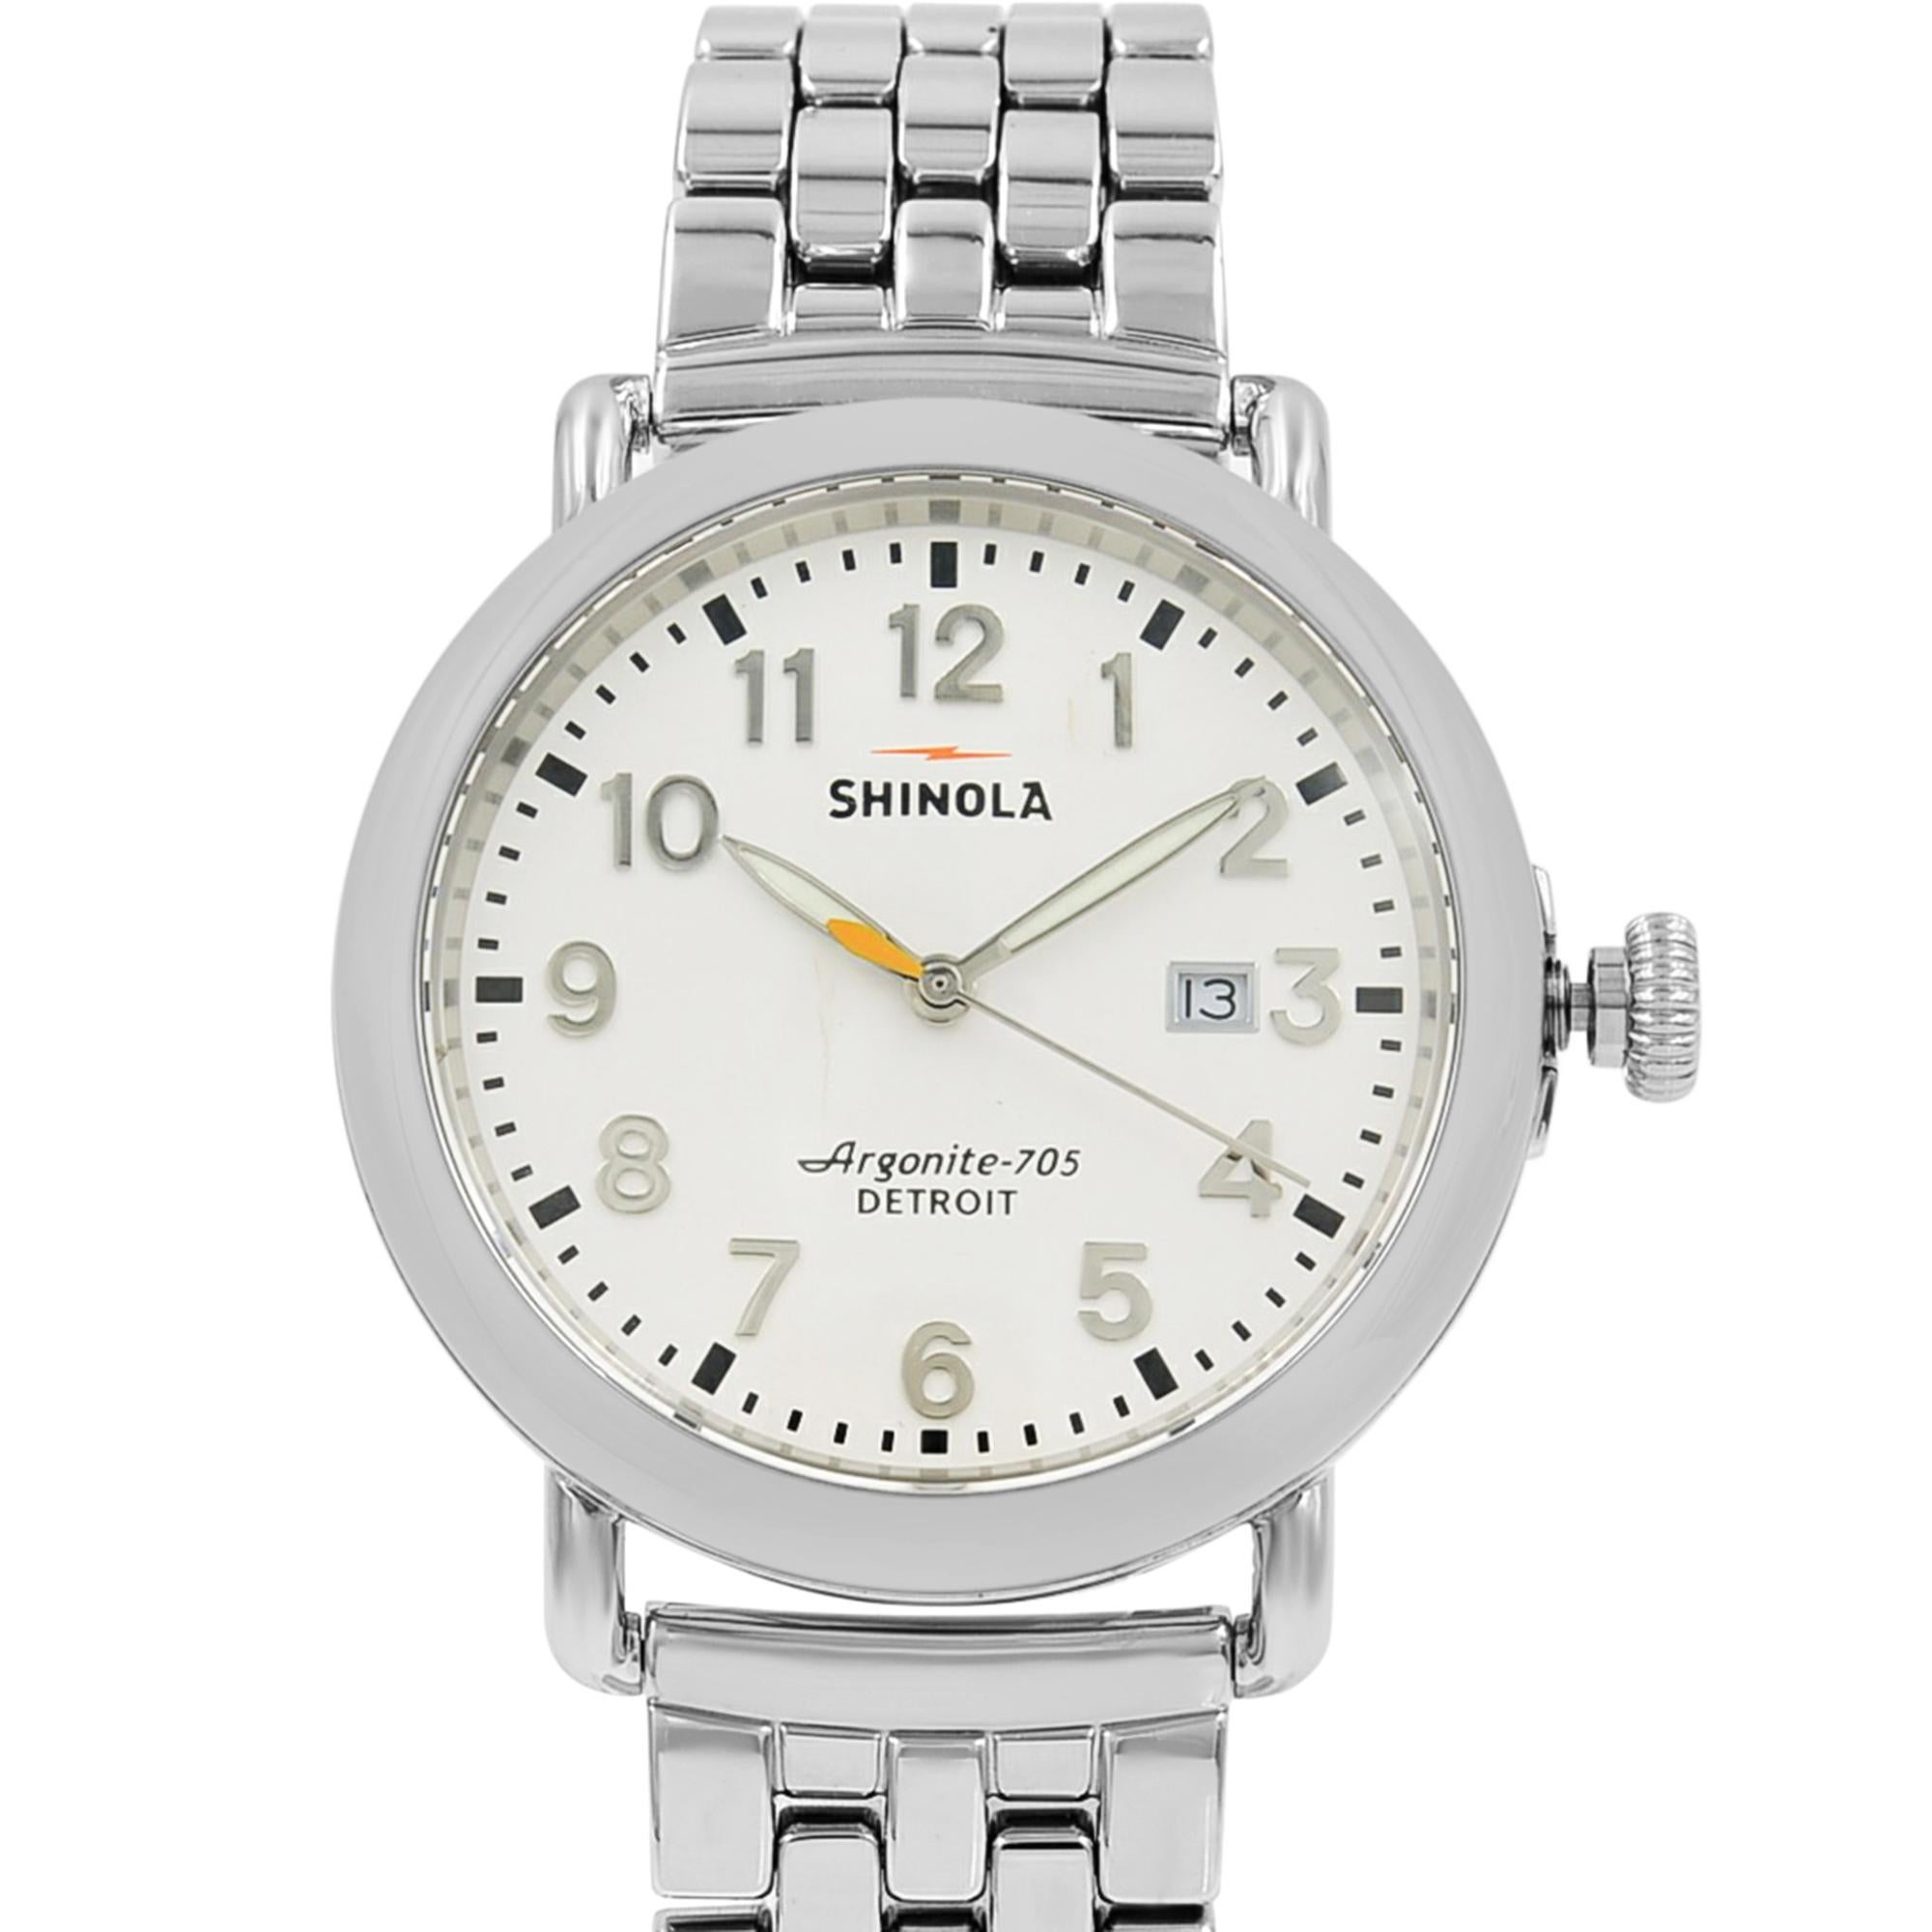 This pre-owned Shinola Runwell  10000054 is a beautiful men's timepiece that is powered by quartz (battery) movement which is cased in a stainless steel case. It has a round shape face, date indicator dial and has hand arabic numerals style markers.